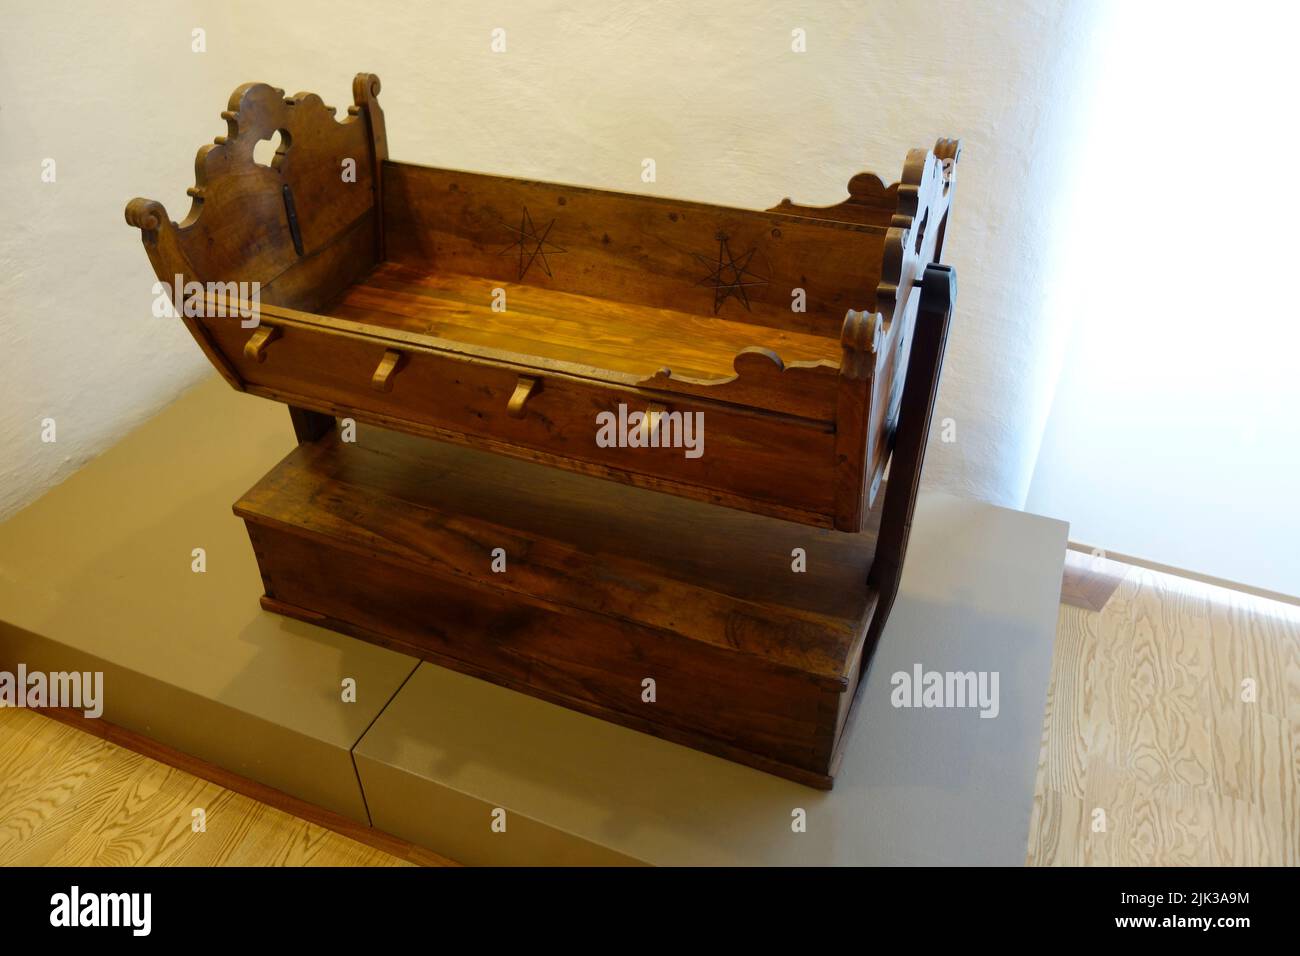 Old Rustic Wooden baby Credle Stock Photo